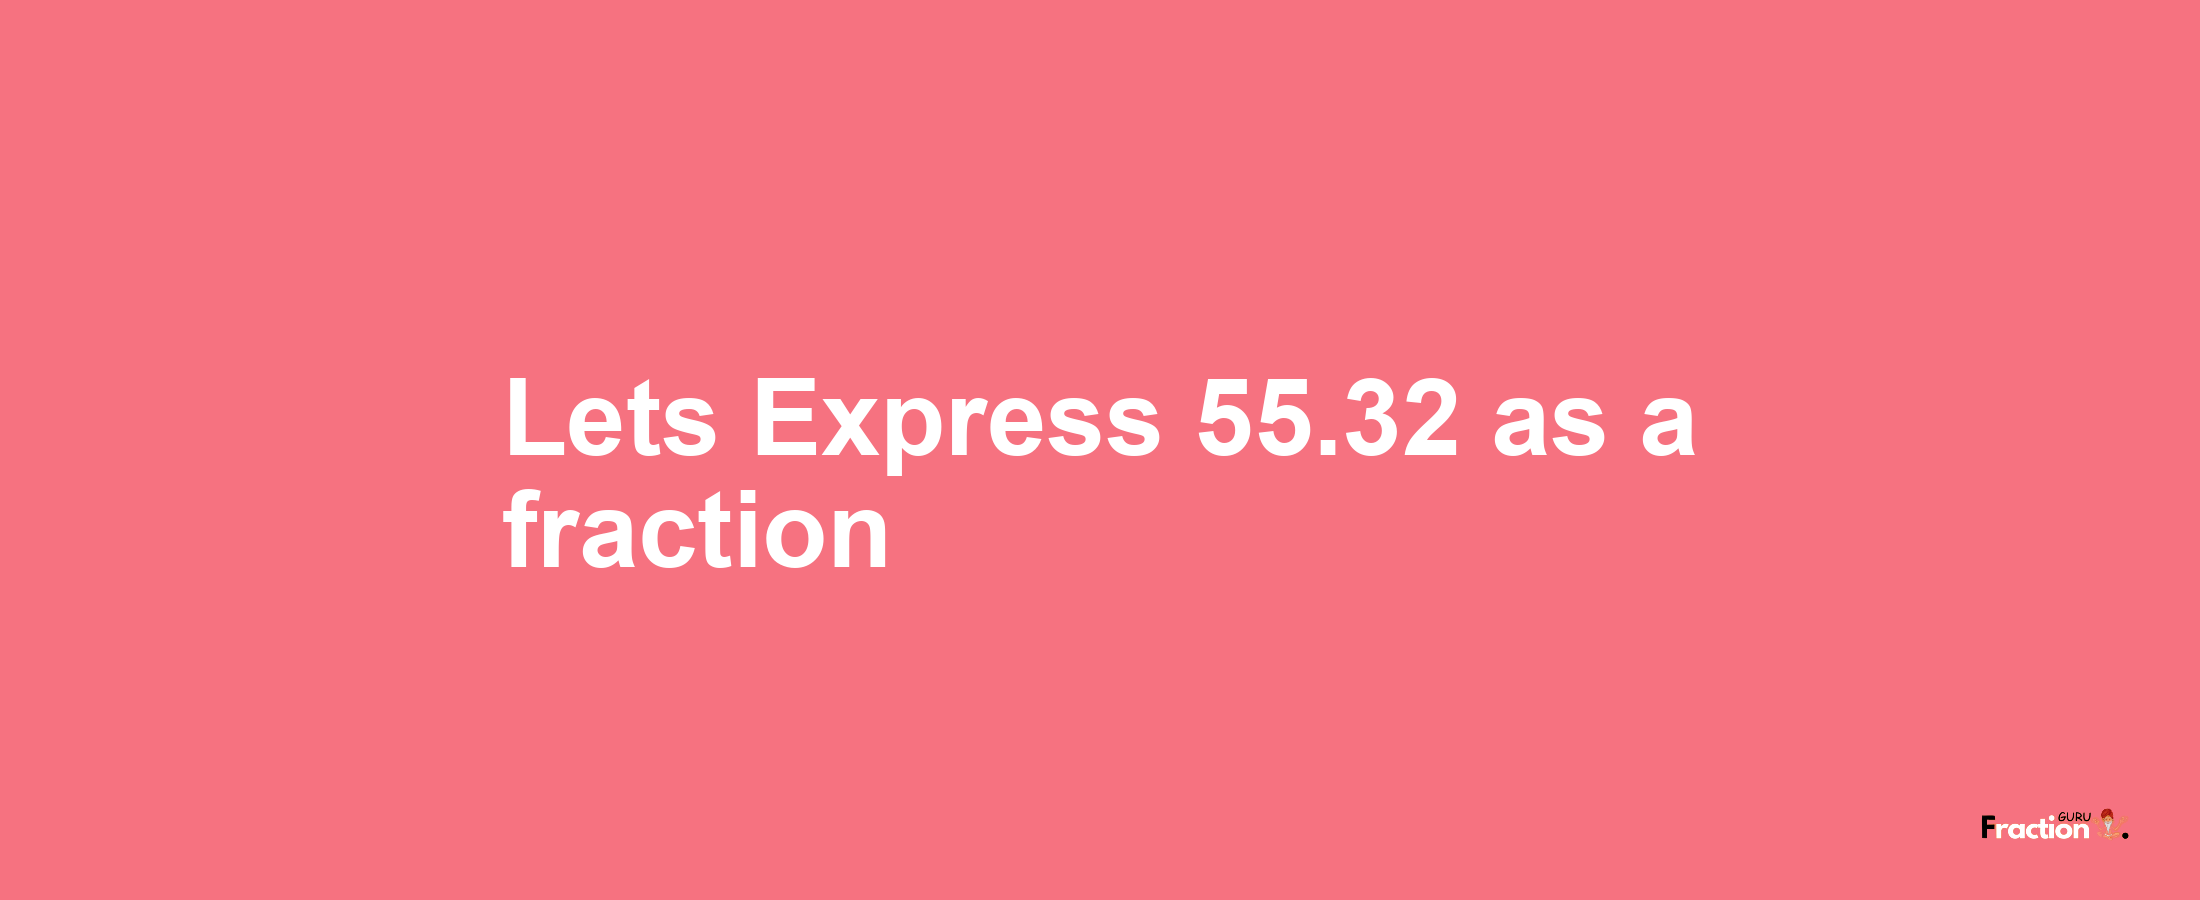 Lets Express 55.32 as afraction